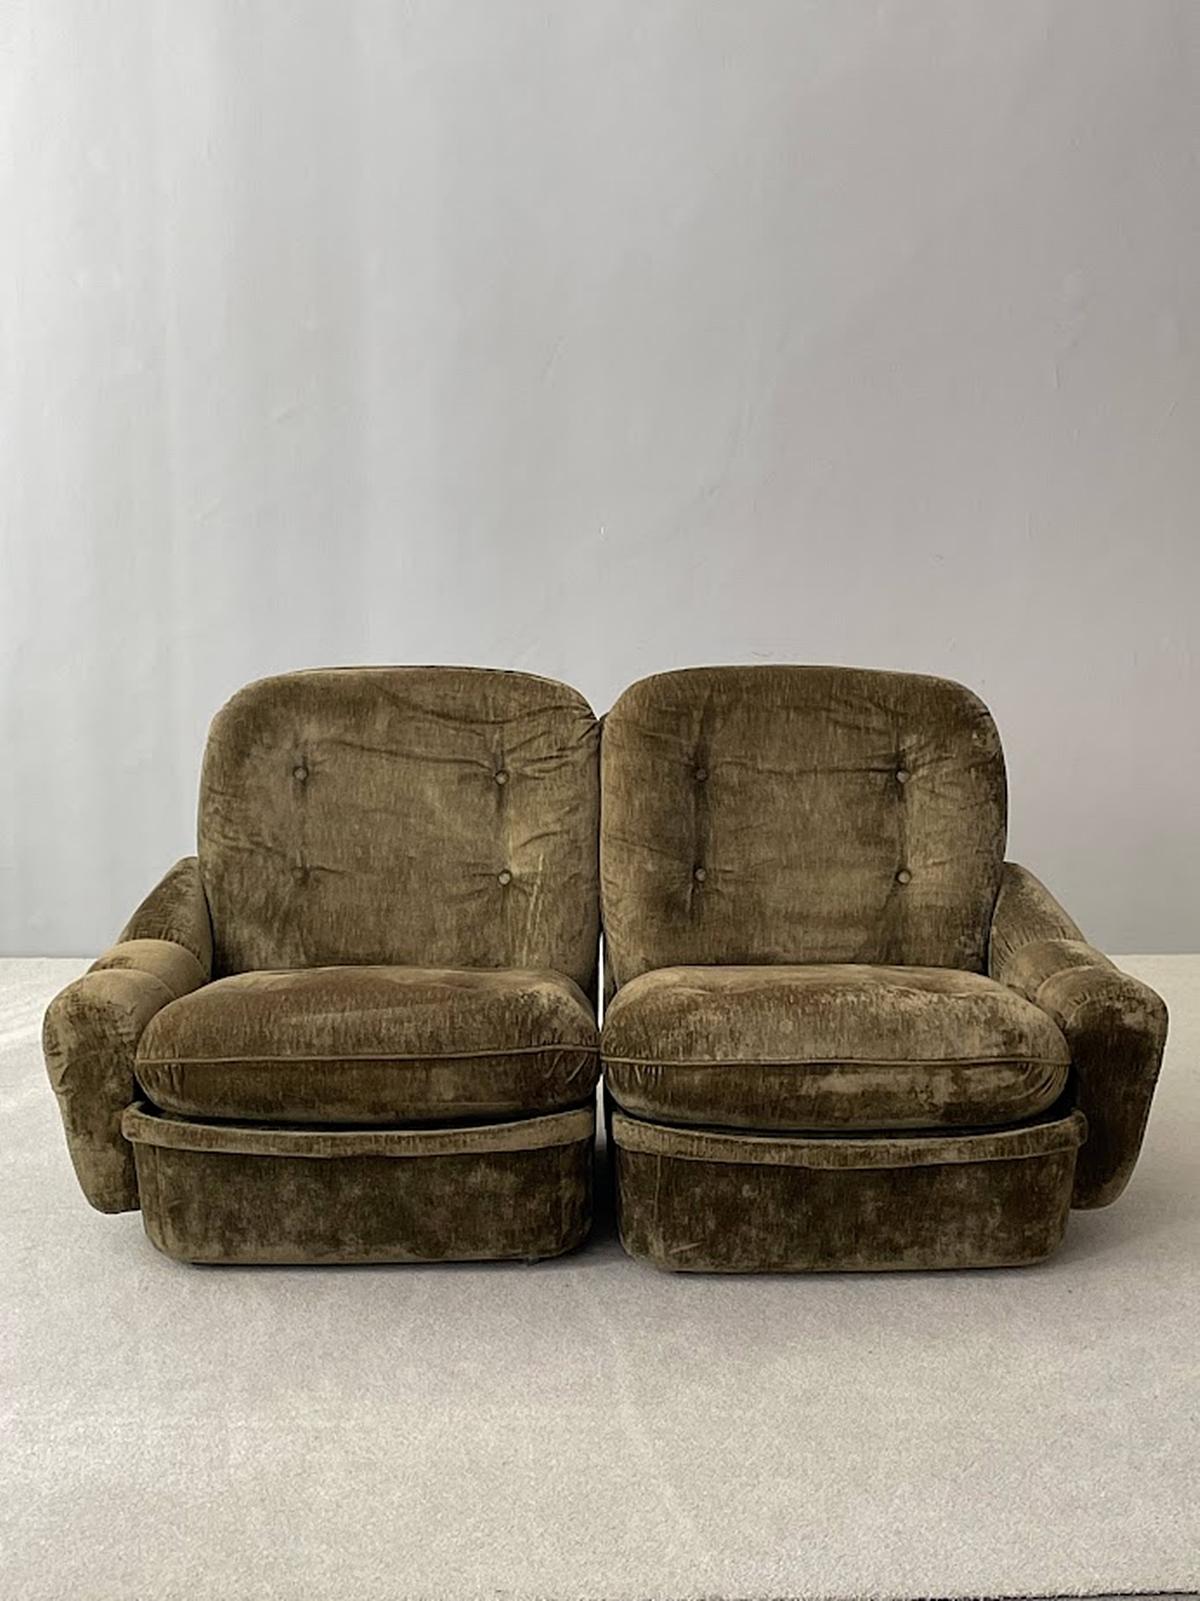 1960s original
Vintage space age fiberglass - velvet sofa set attributed to Michel Cadestin, made for Airborne International, France.
Five pieces, modular, arms are removable

